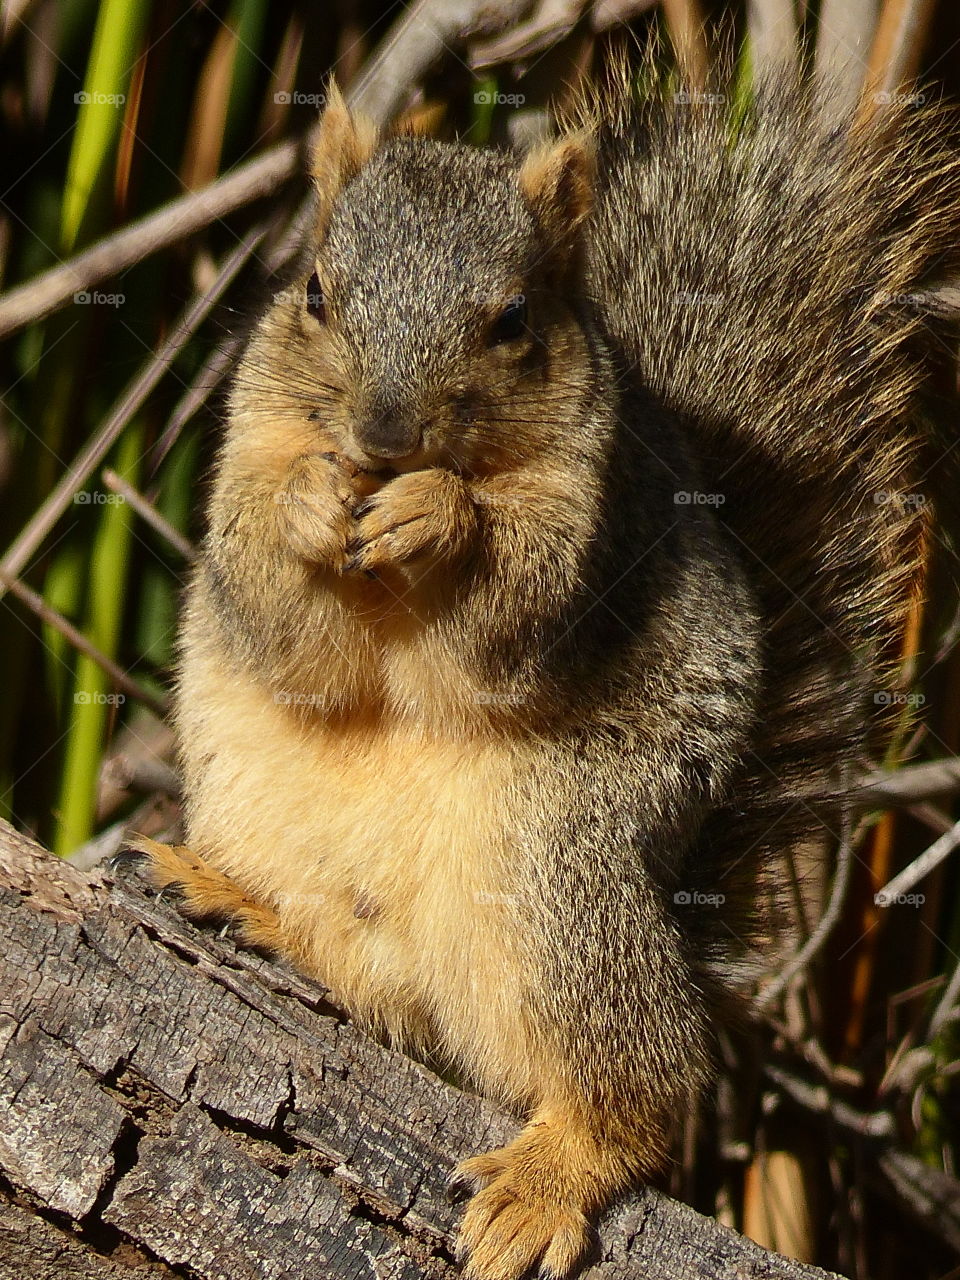 Squirrel nibbles on nut